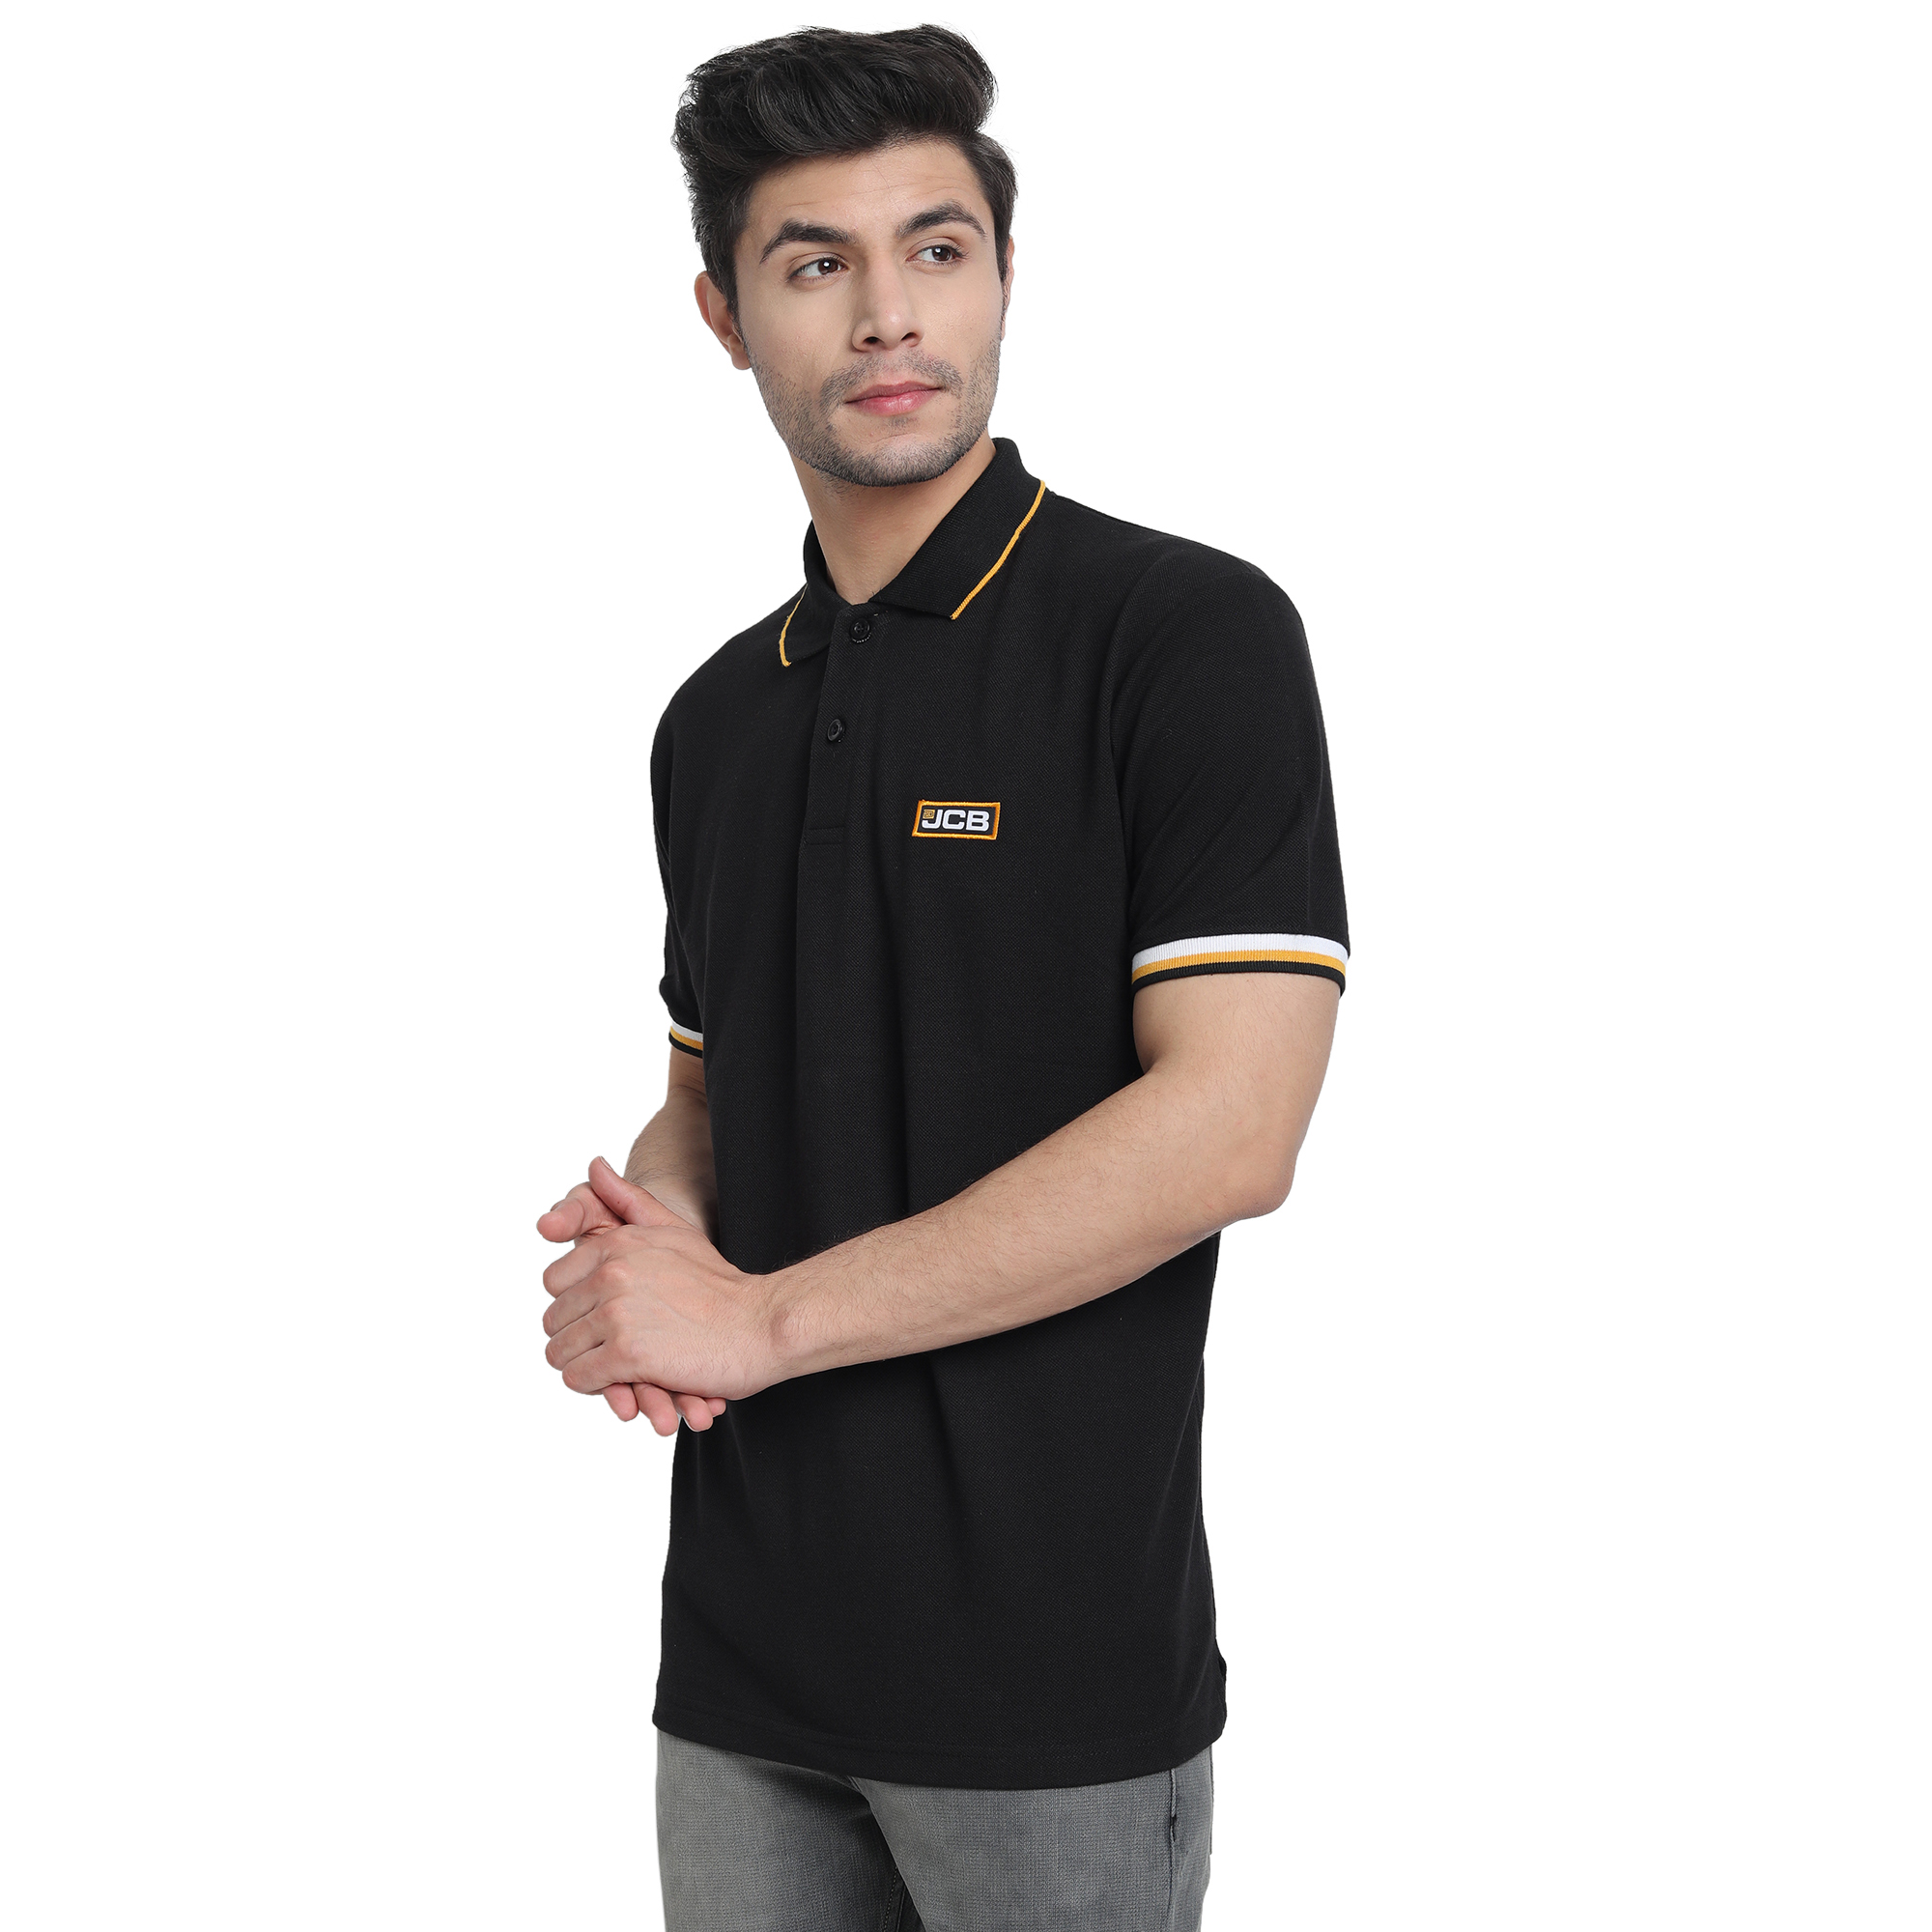 JCB Black Polo T-Shirt – Welcome to the JCB merchandise shop India website